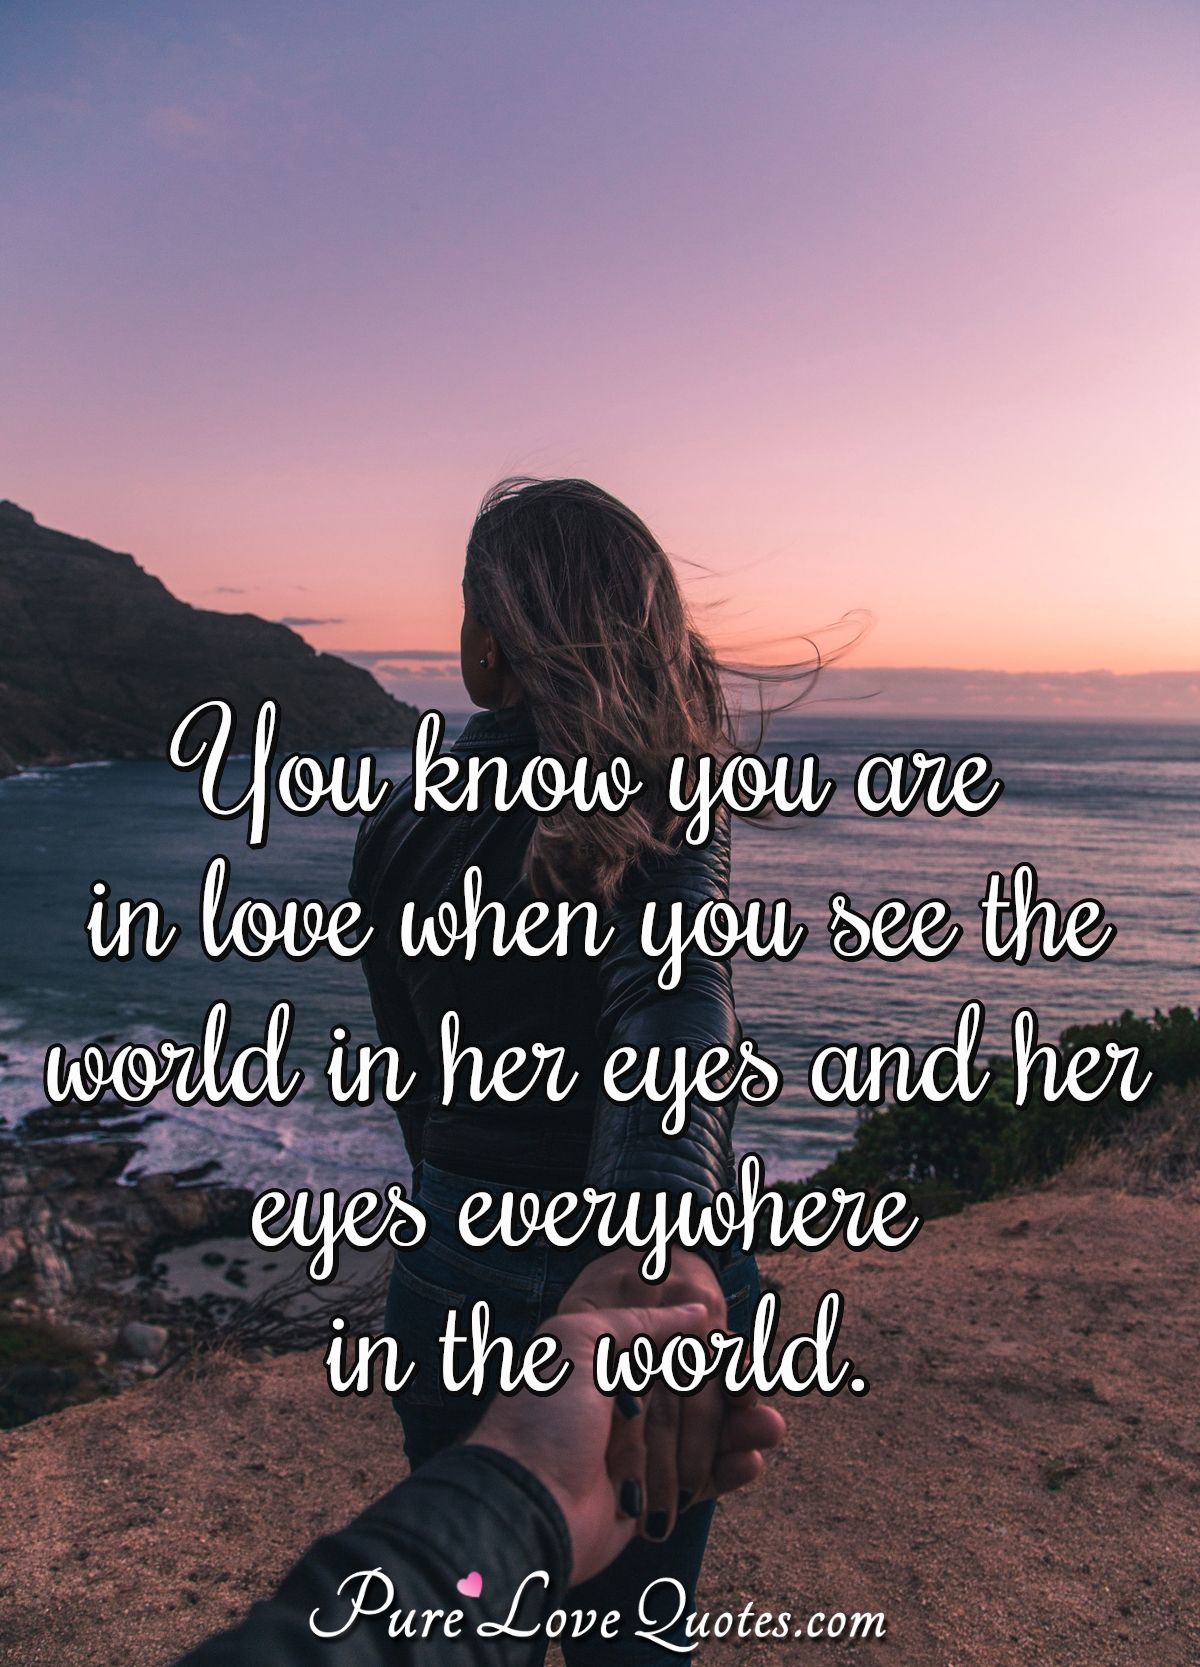 You know you are in love when you see the world in her eyes and her eyes everywhere in the world. - Anonymous